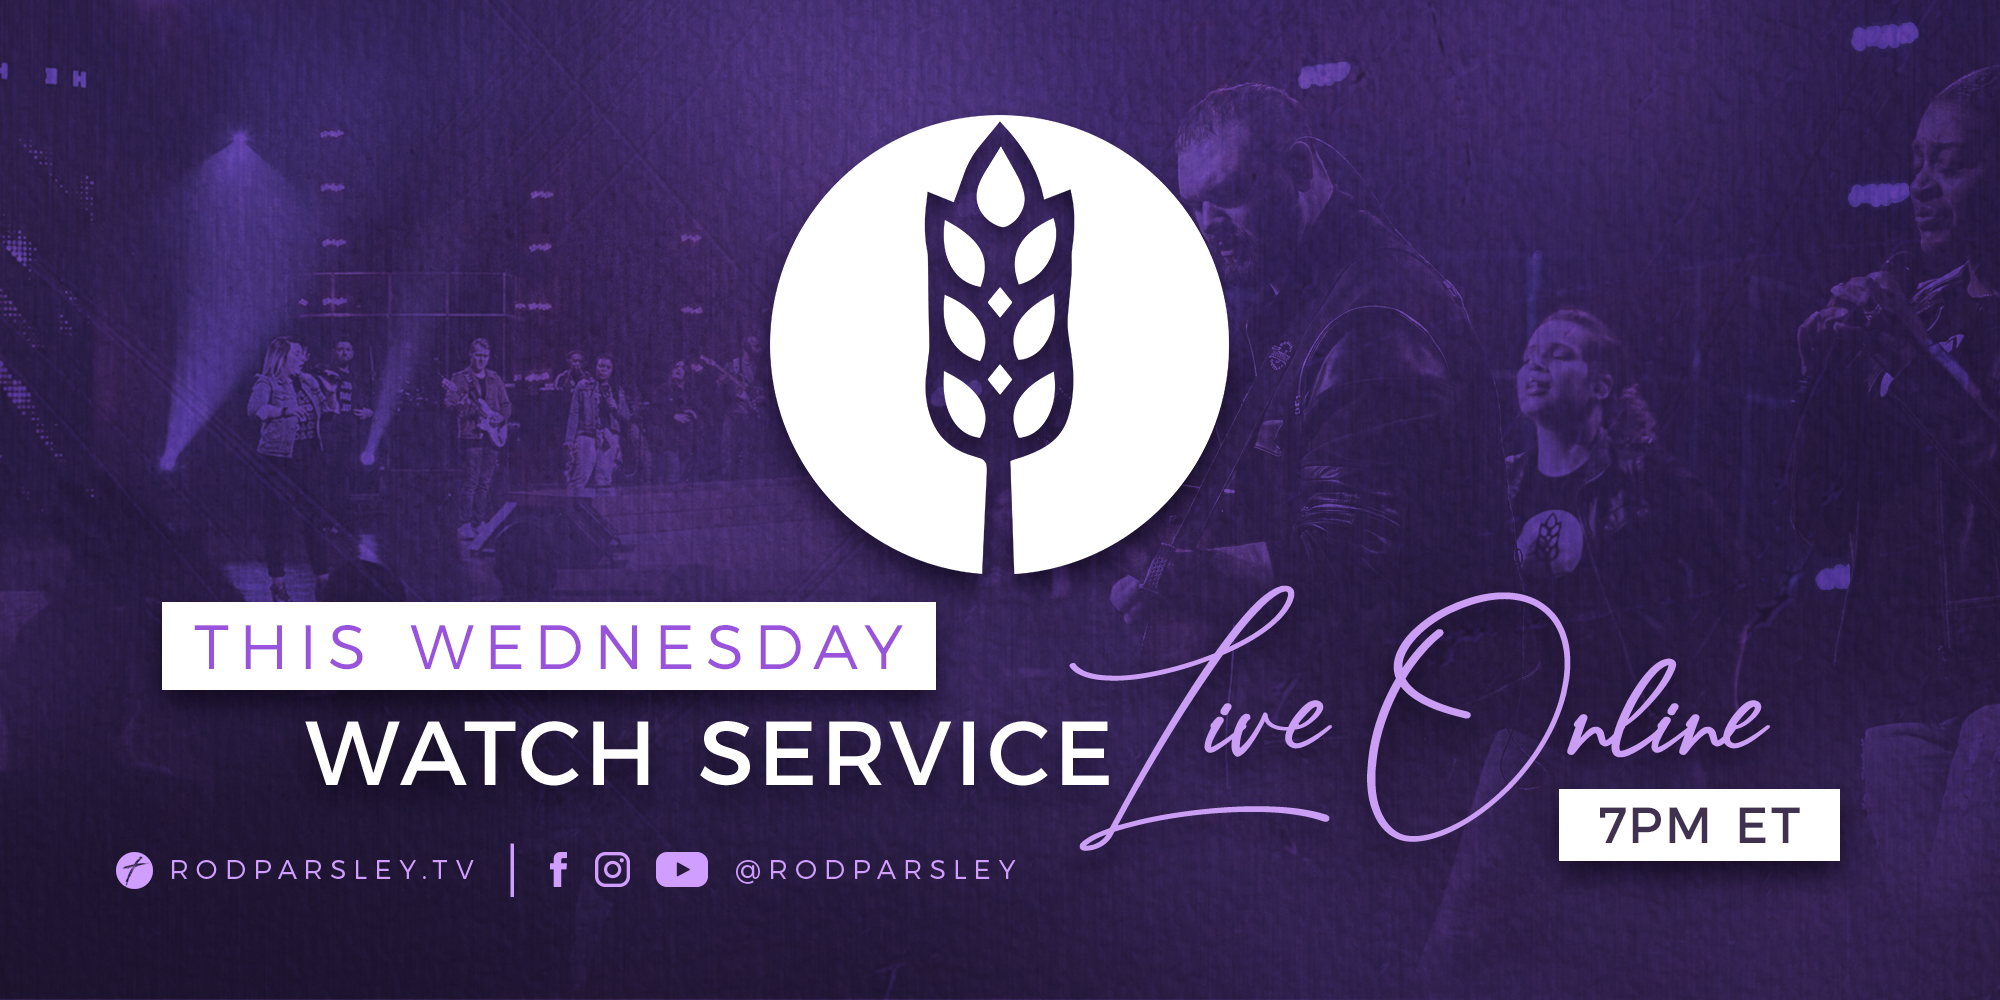 This Wednesday watch service live online 7PM ET rodparsley.tv facebook instagram youtube @rodparsley